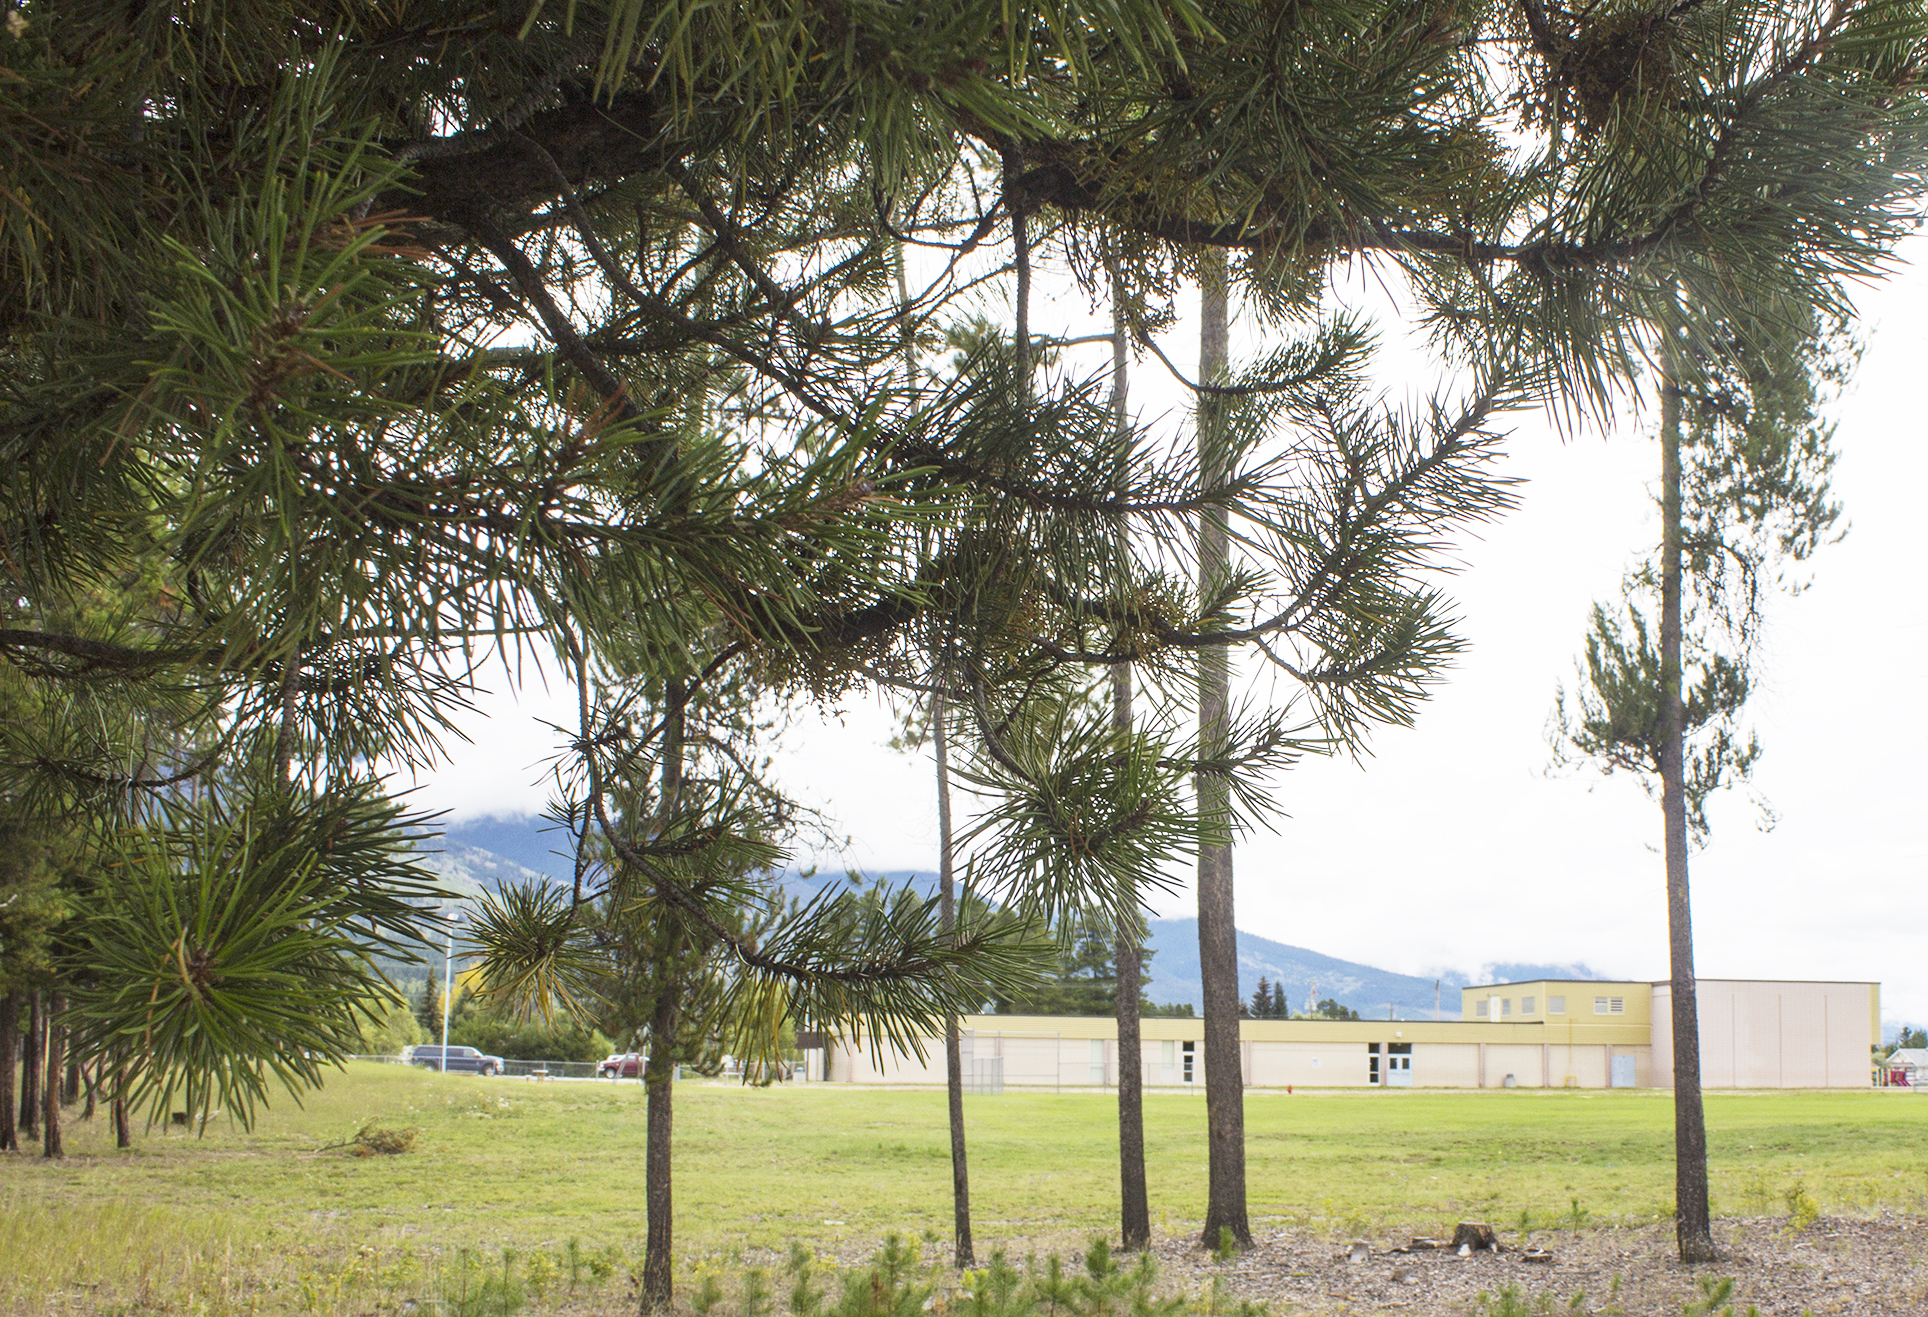 Elementary school’s trees are pining away